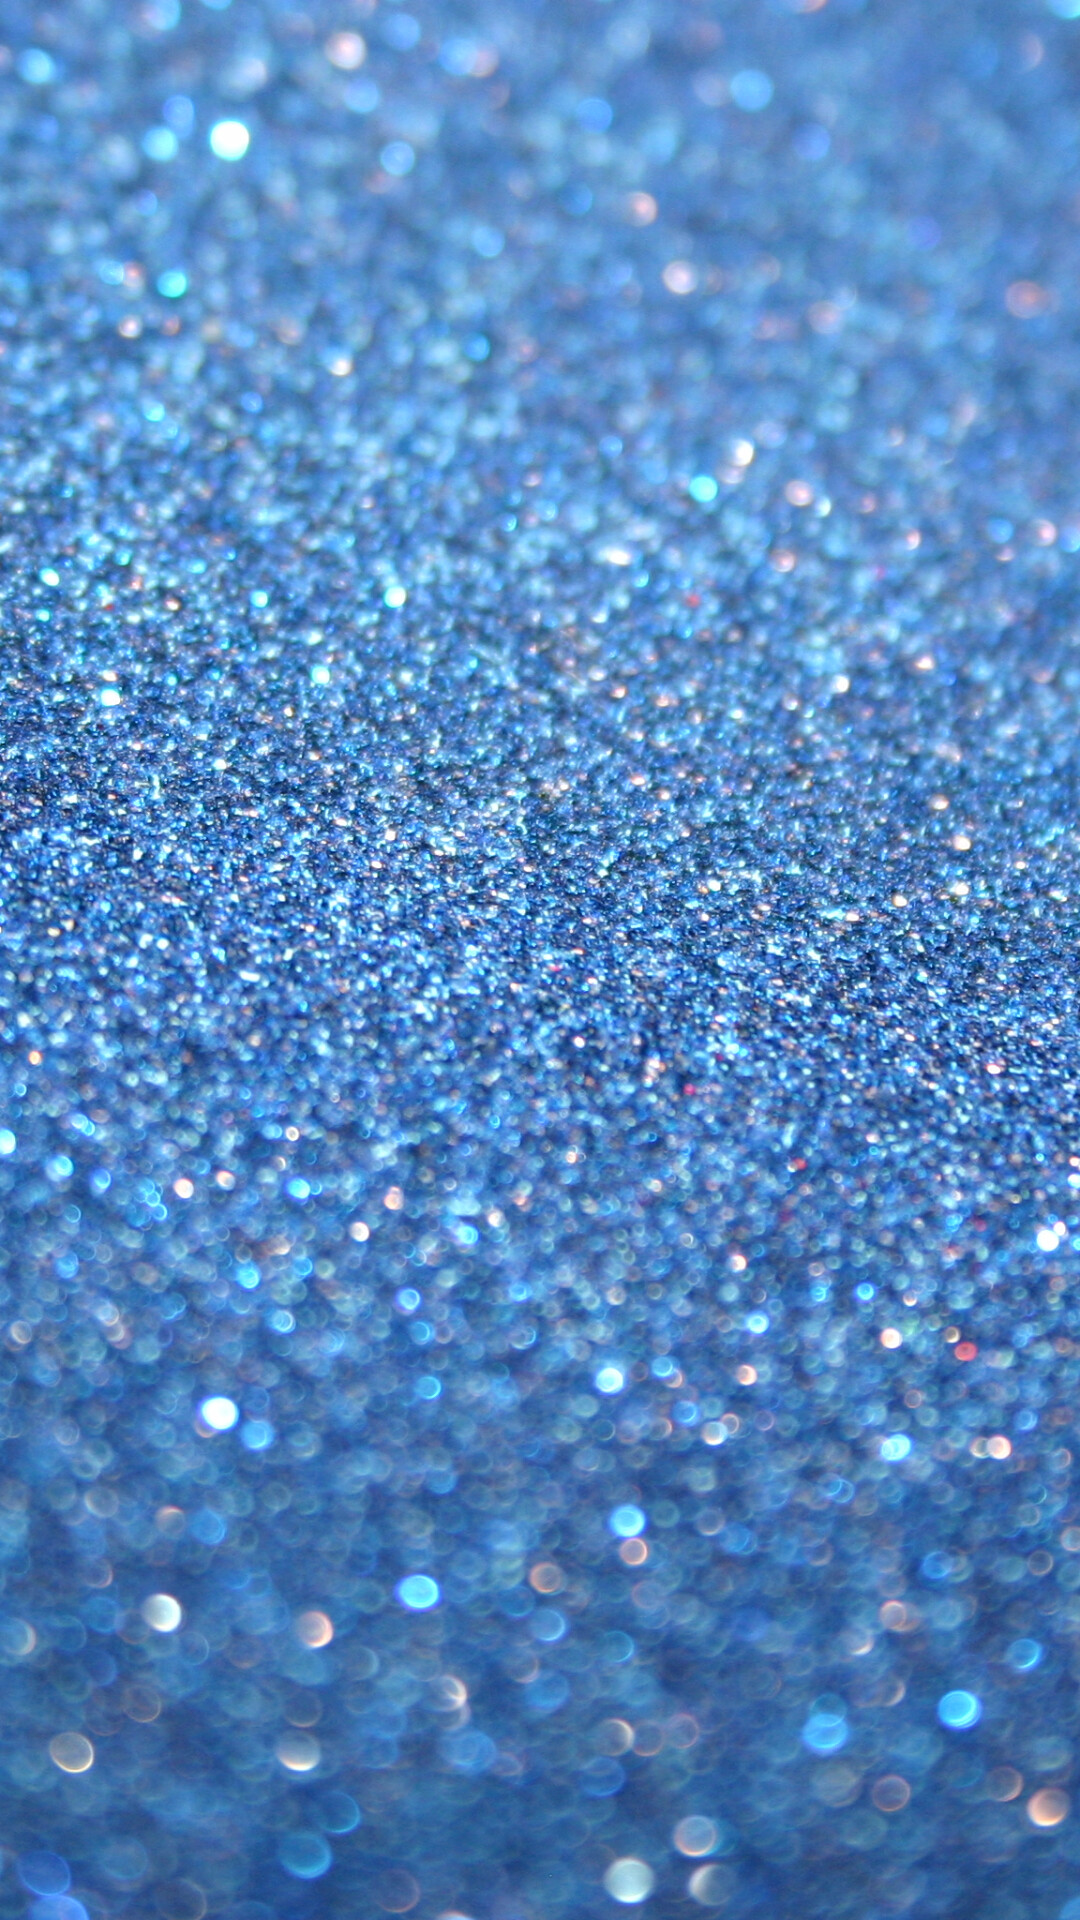 Sparkle: Used by nail artists and make-up artists in their works. 1080x1920 Full HD Wallpaper.